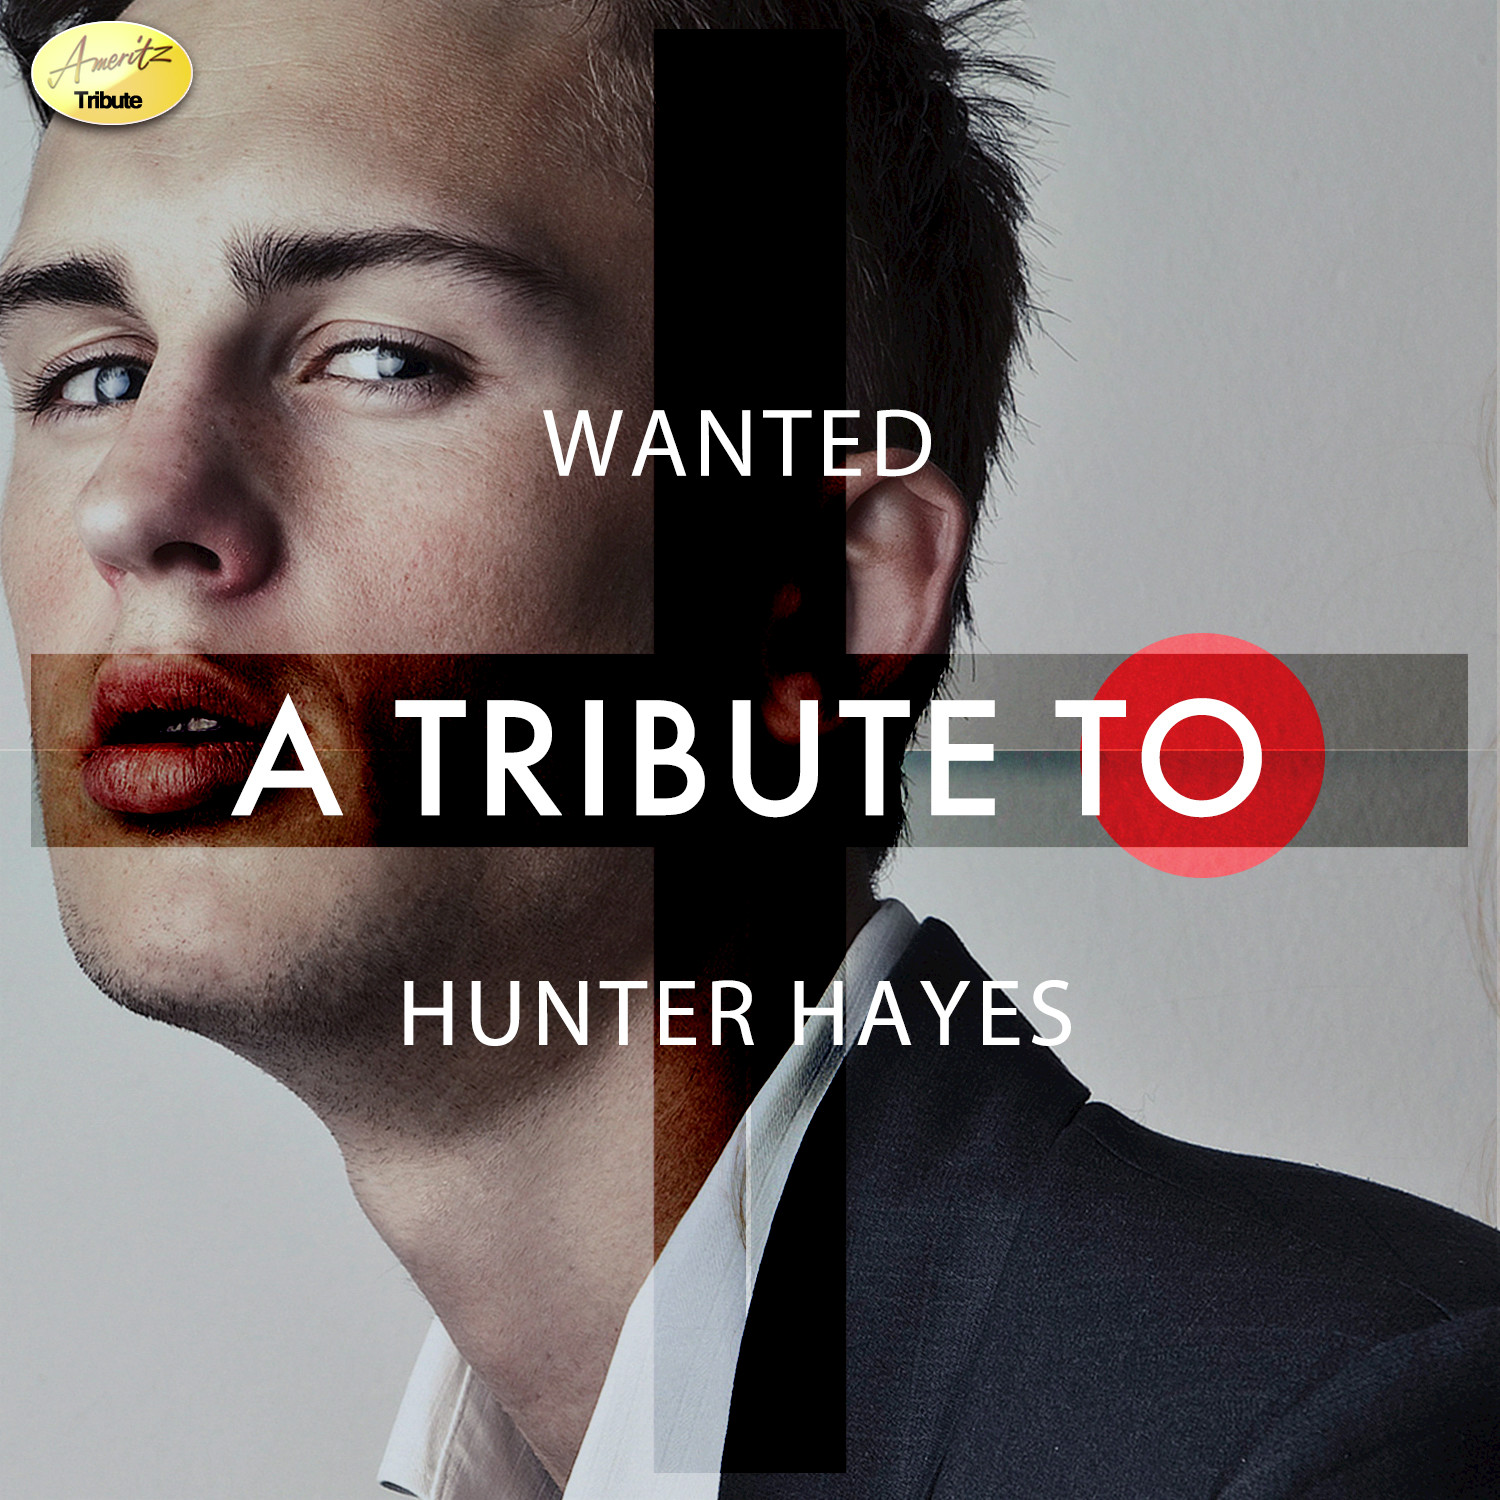 Wanted - A Tribute to Hunter Hayes